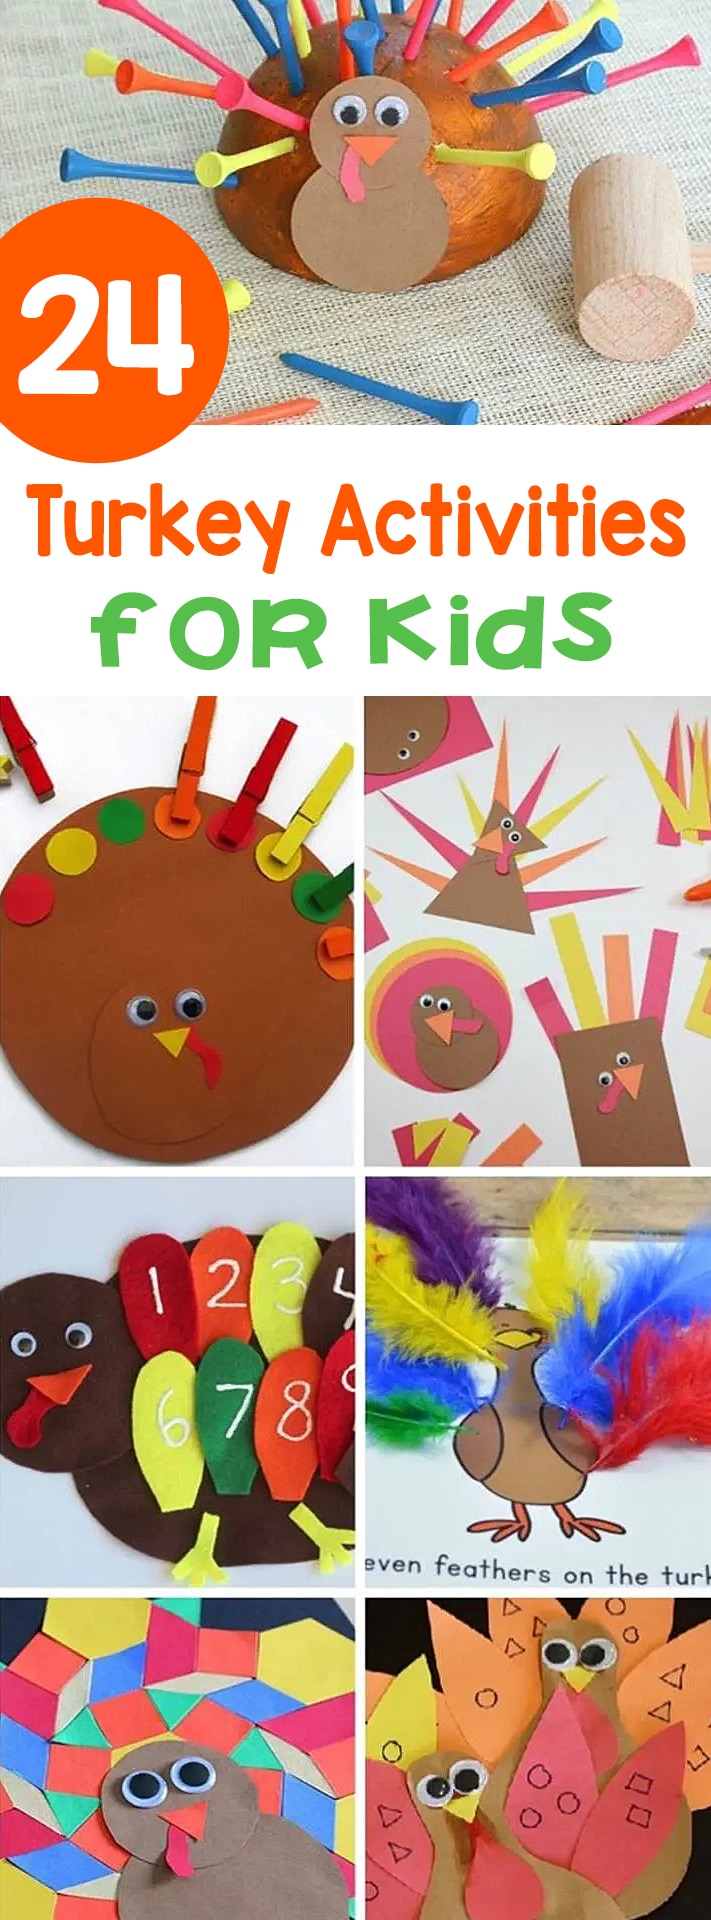 These turkey activities for kids are the perfect way to transition into the fall and Thanksgiving season! Your kids will love them!